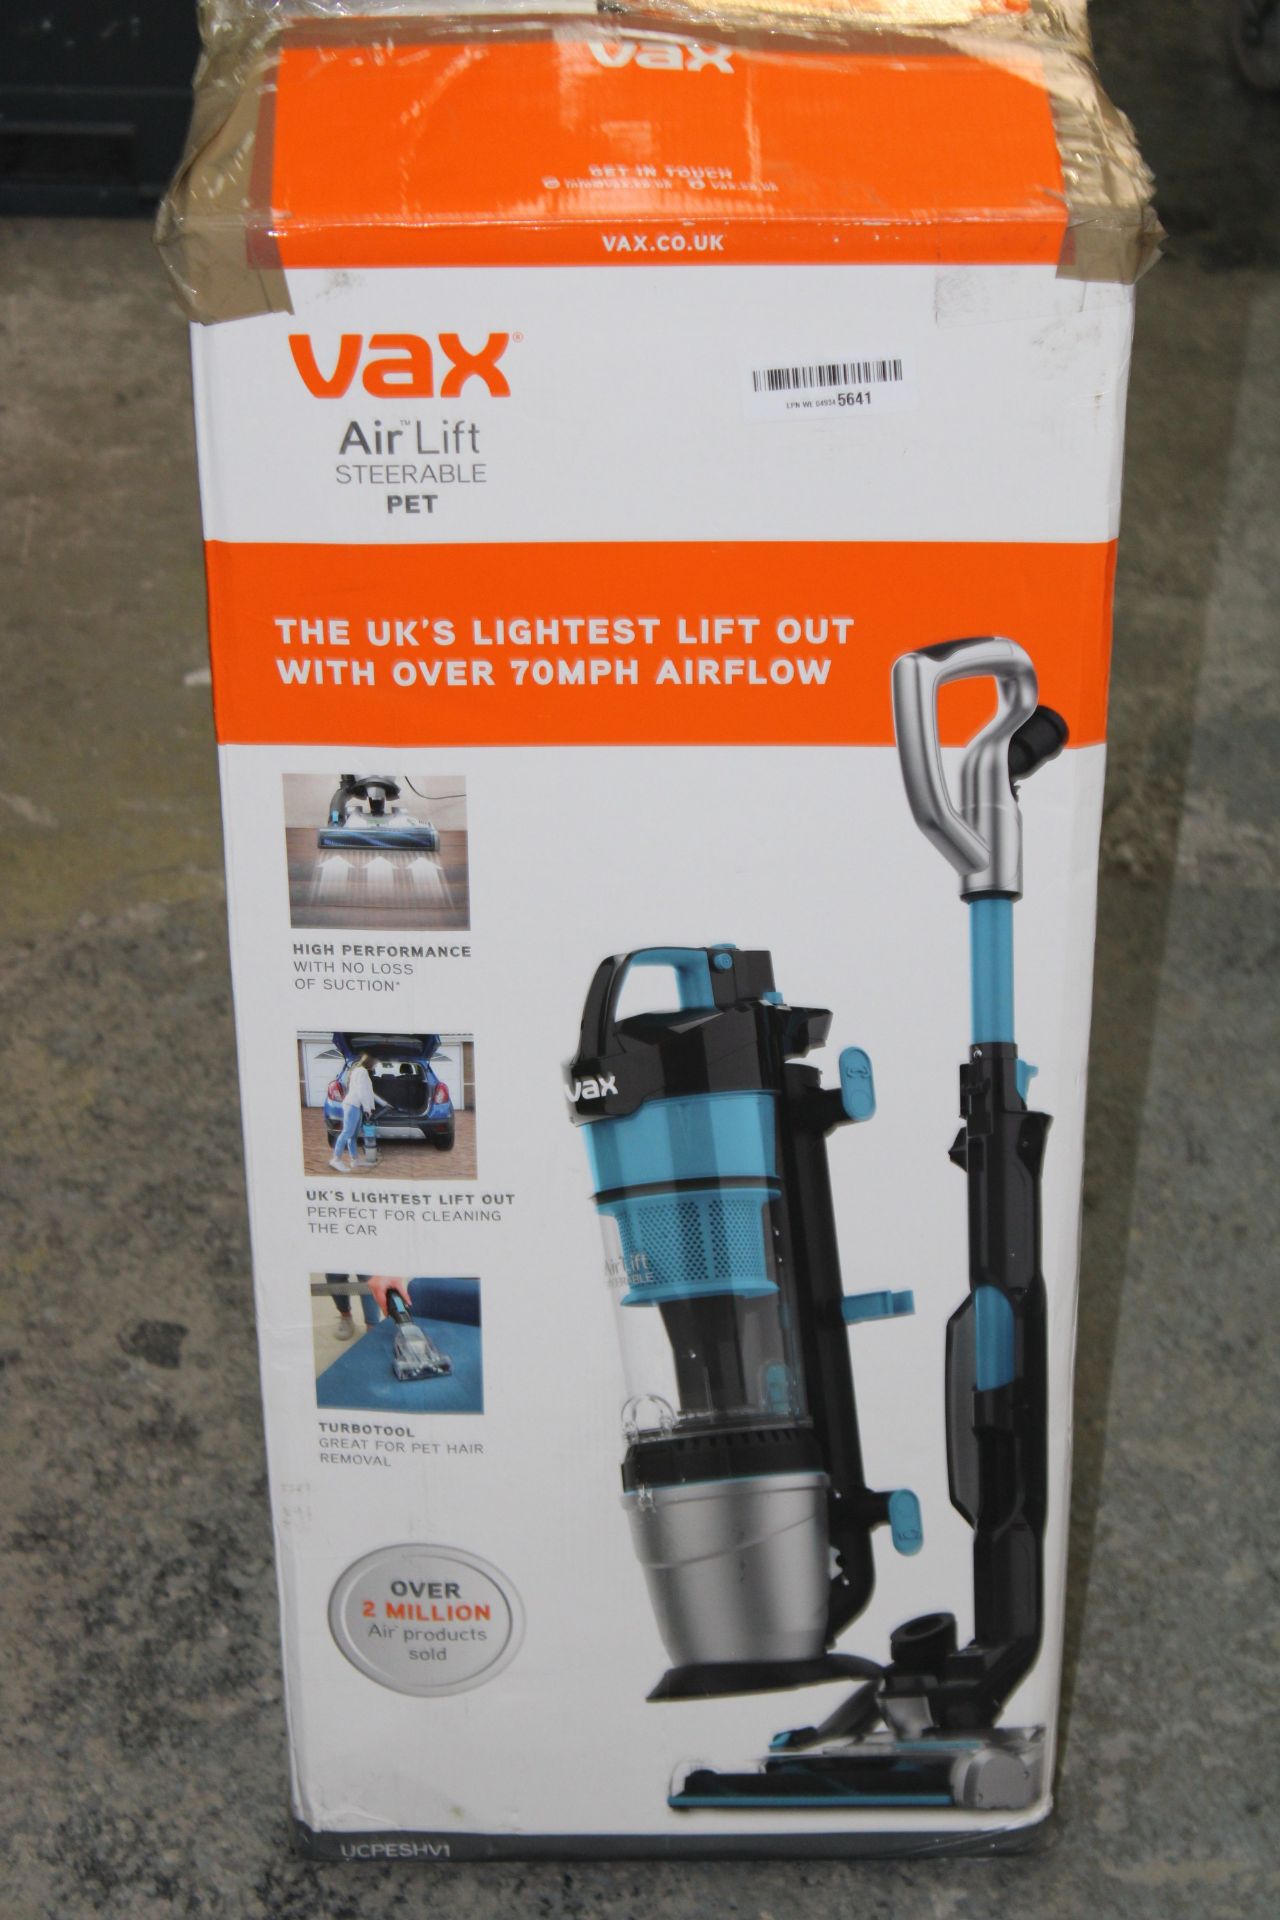 BOXED VAX AIR LIFT STEERABLE PET VACUUM CLEANER RRP £79.99Condition ReportAppraisal Available on